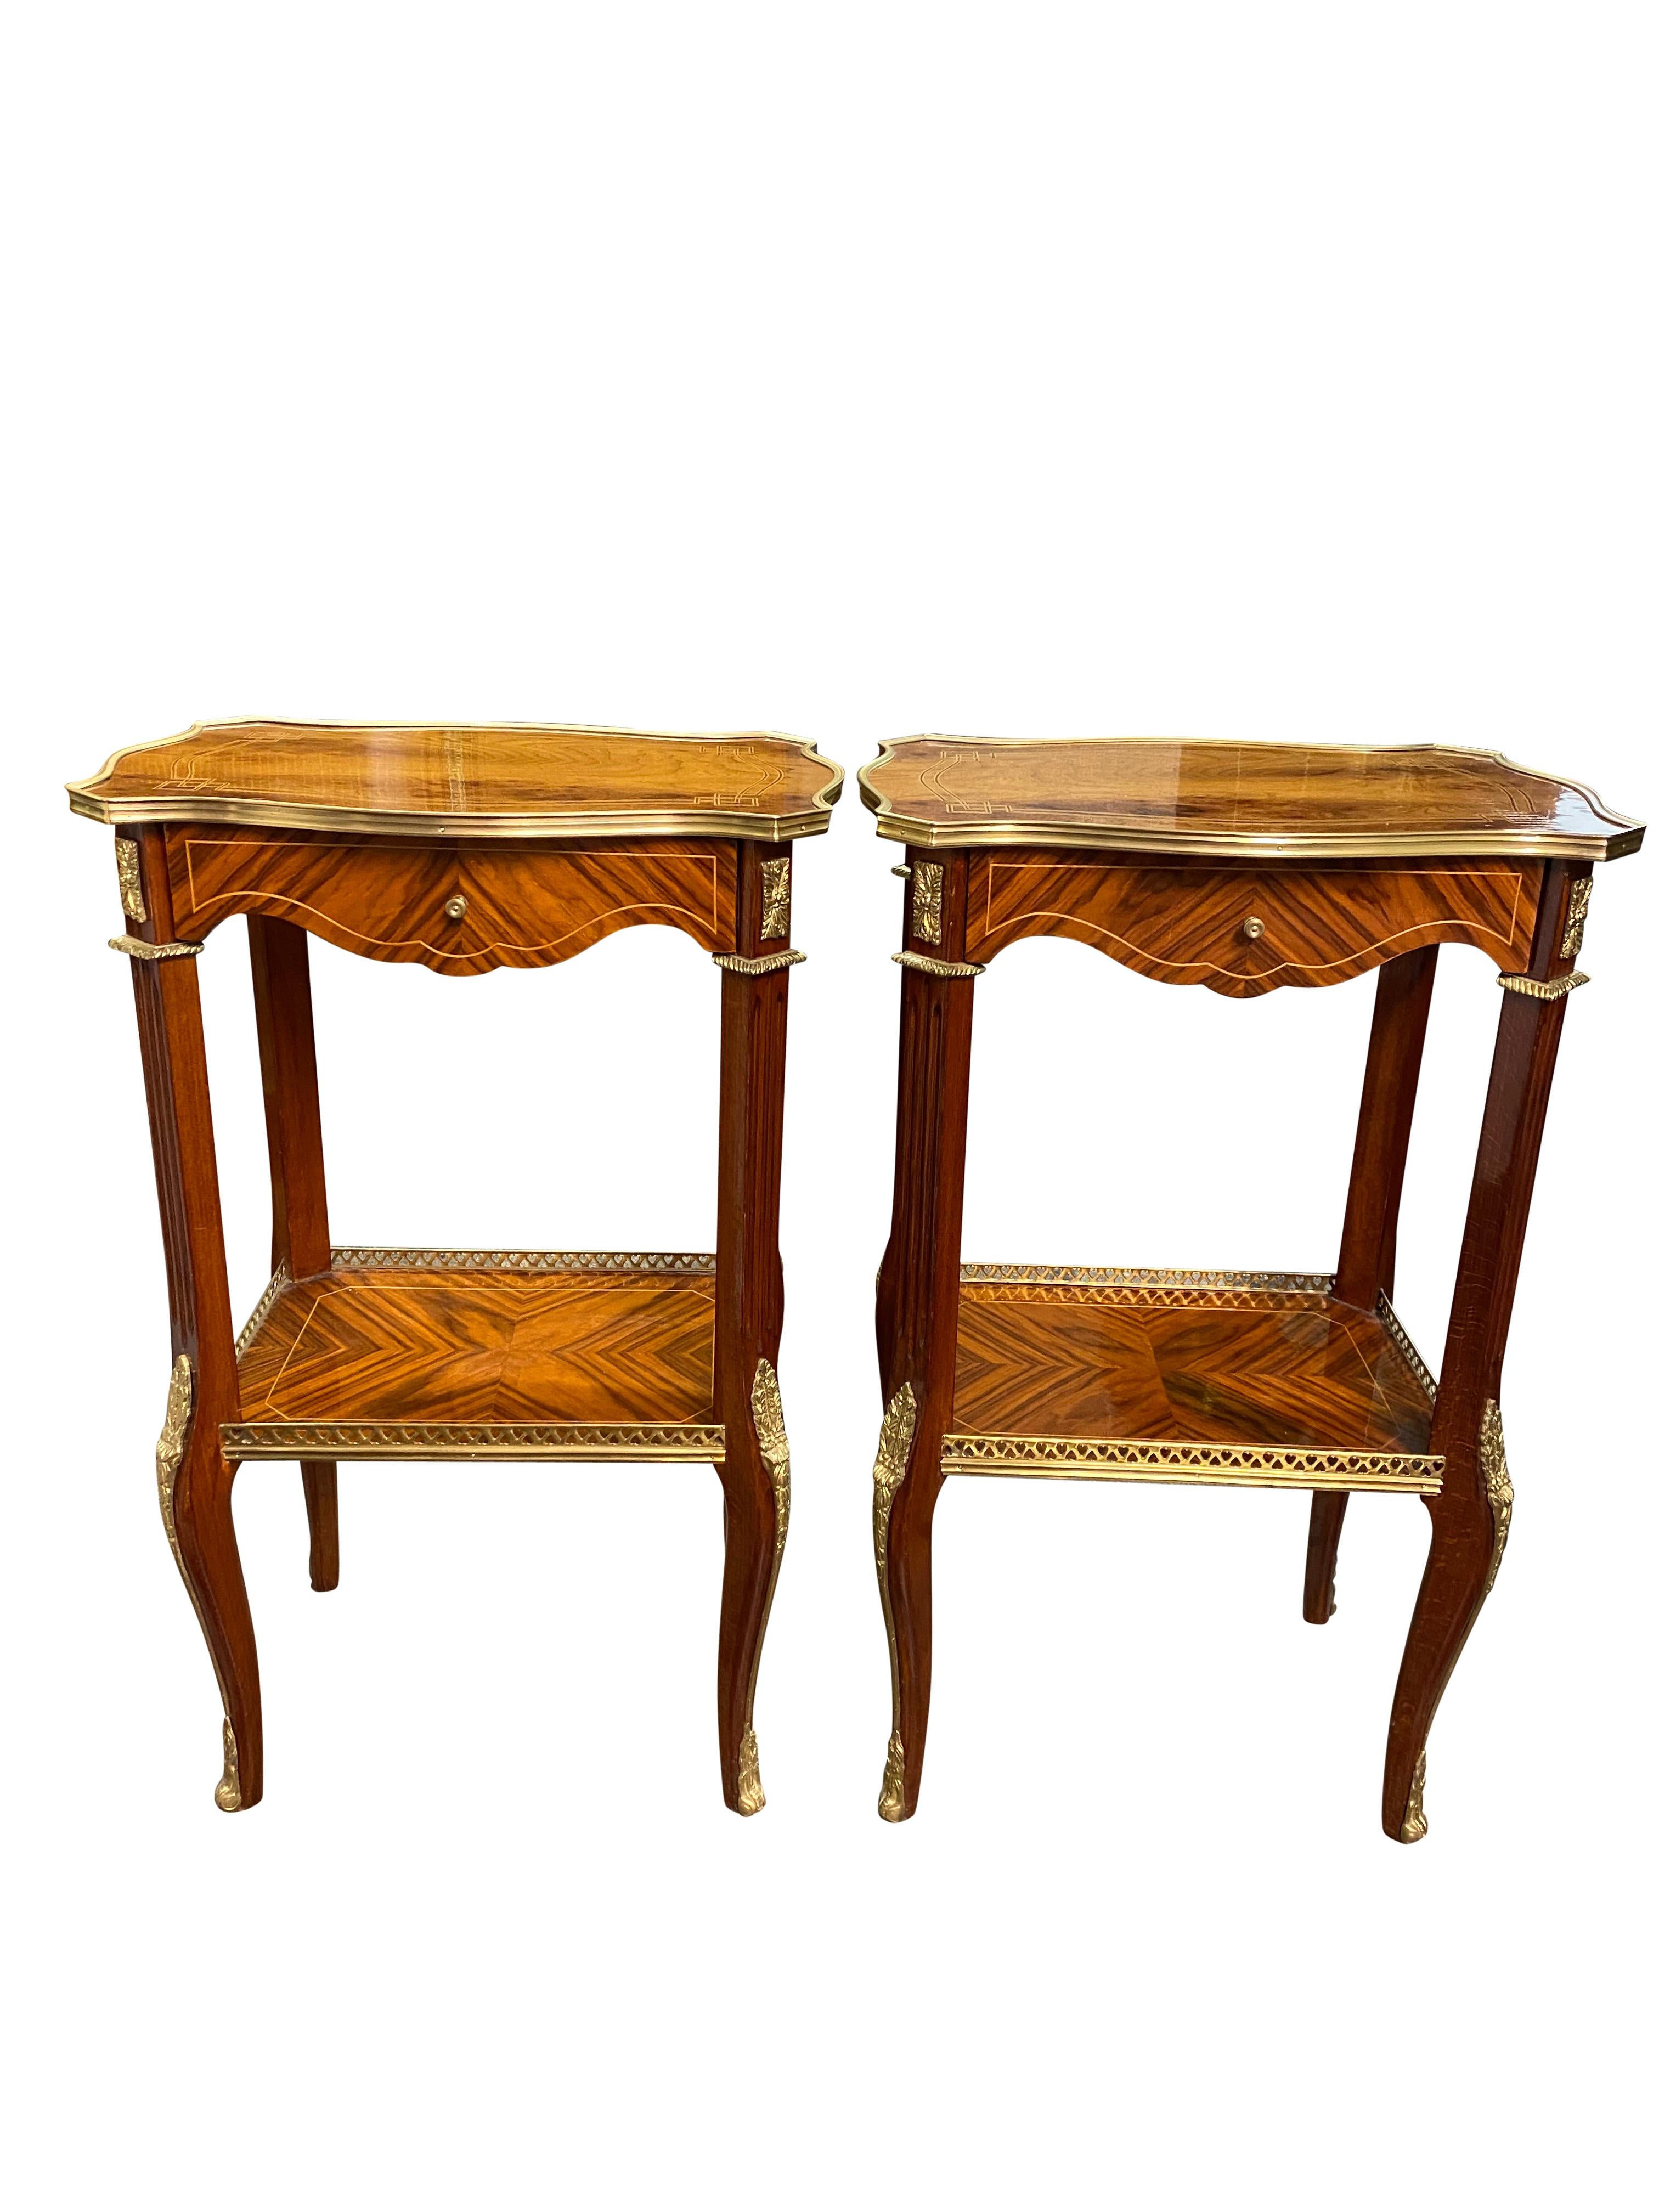 A stunning pair of 20th century English Regency style side tables. A gorgeous and elegant design perfect for modern interiors. 

Measurements (cm):
Height 71
Width 51
Depth 41.